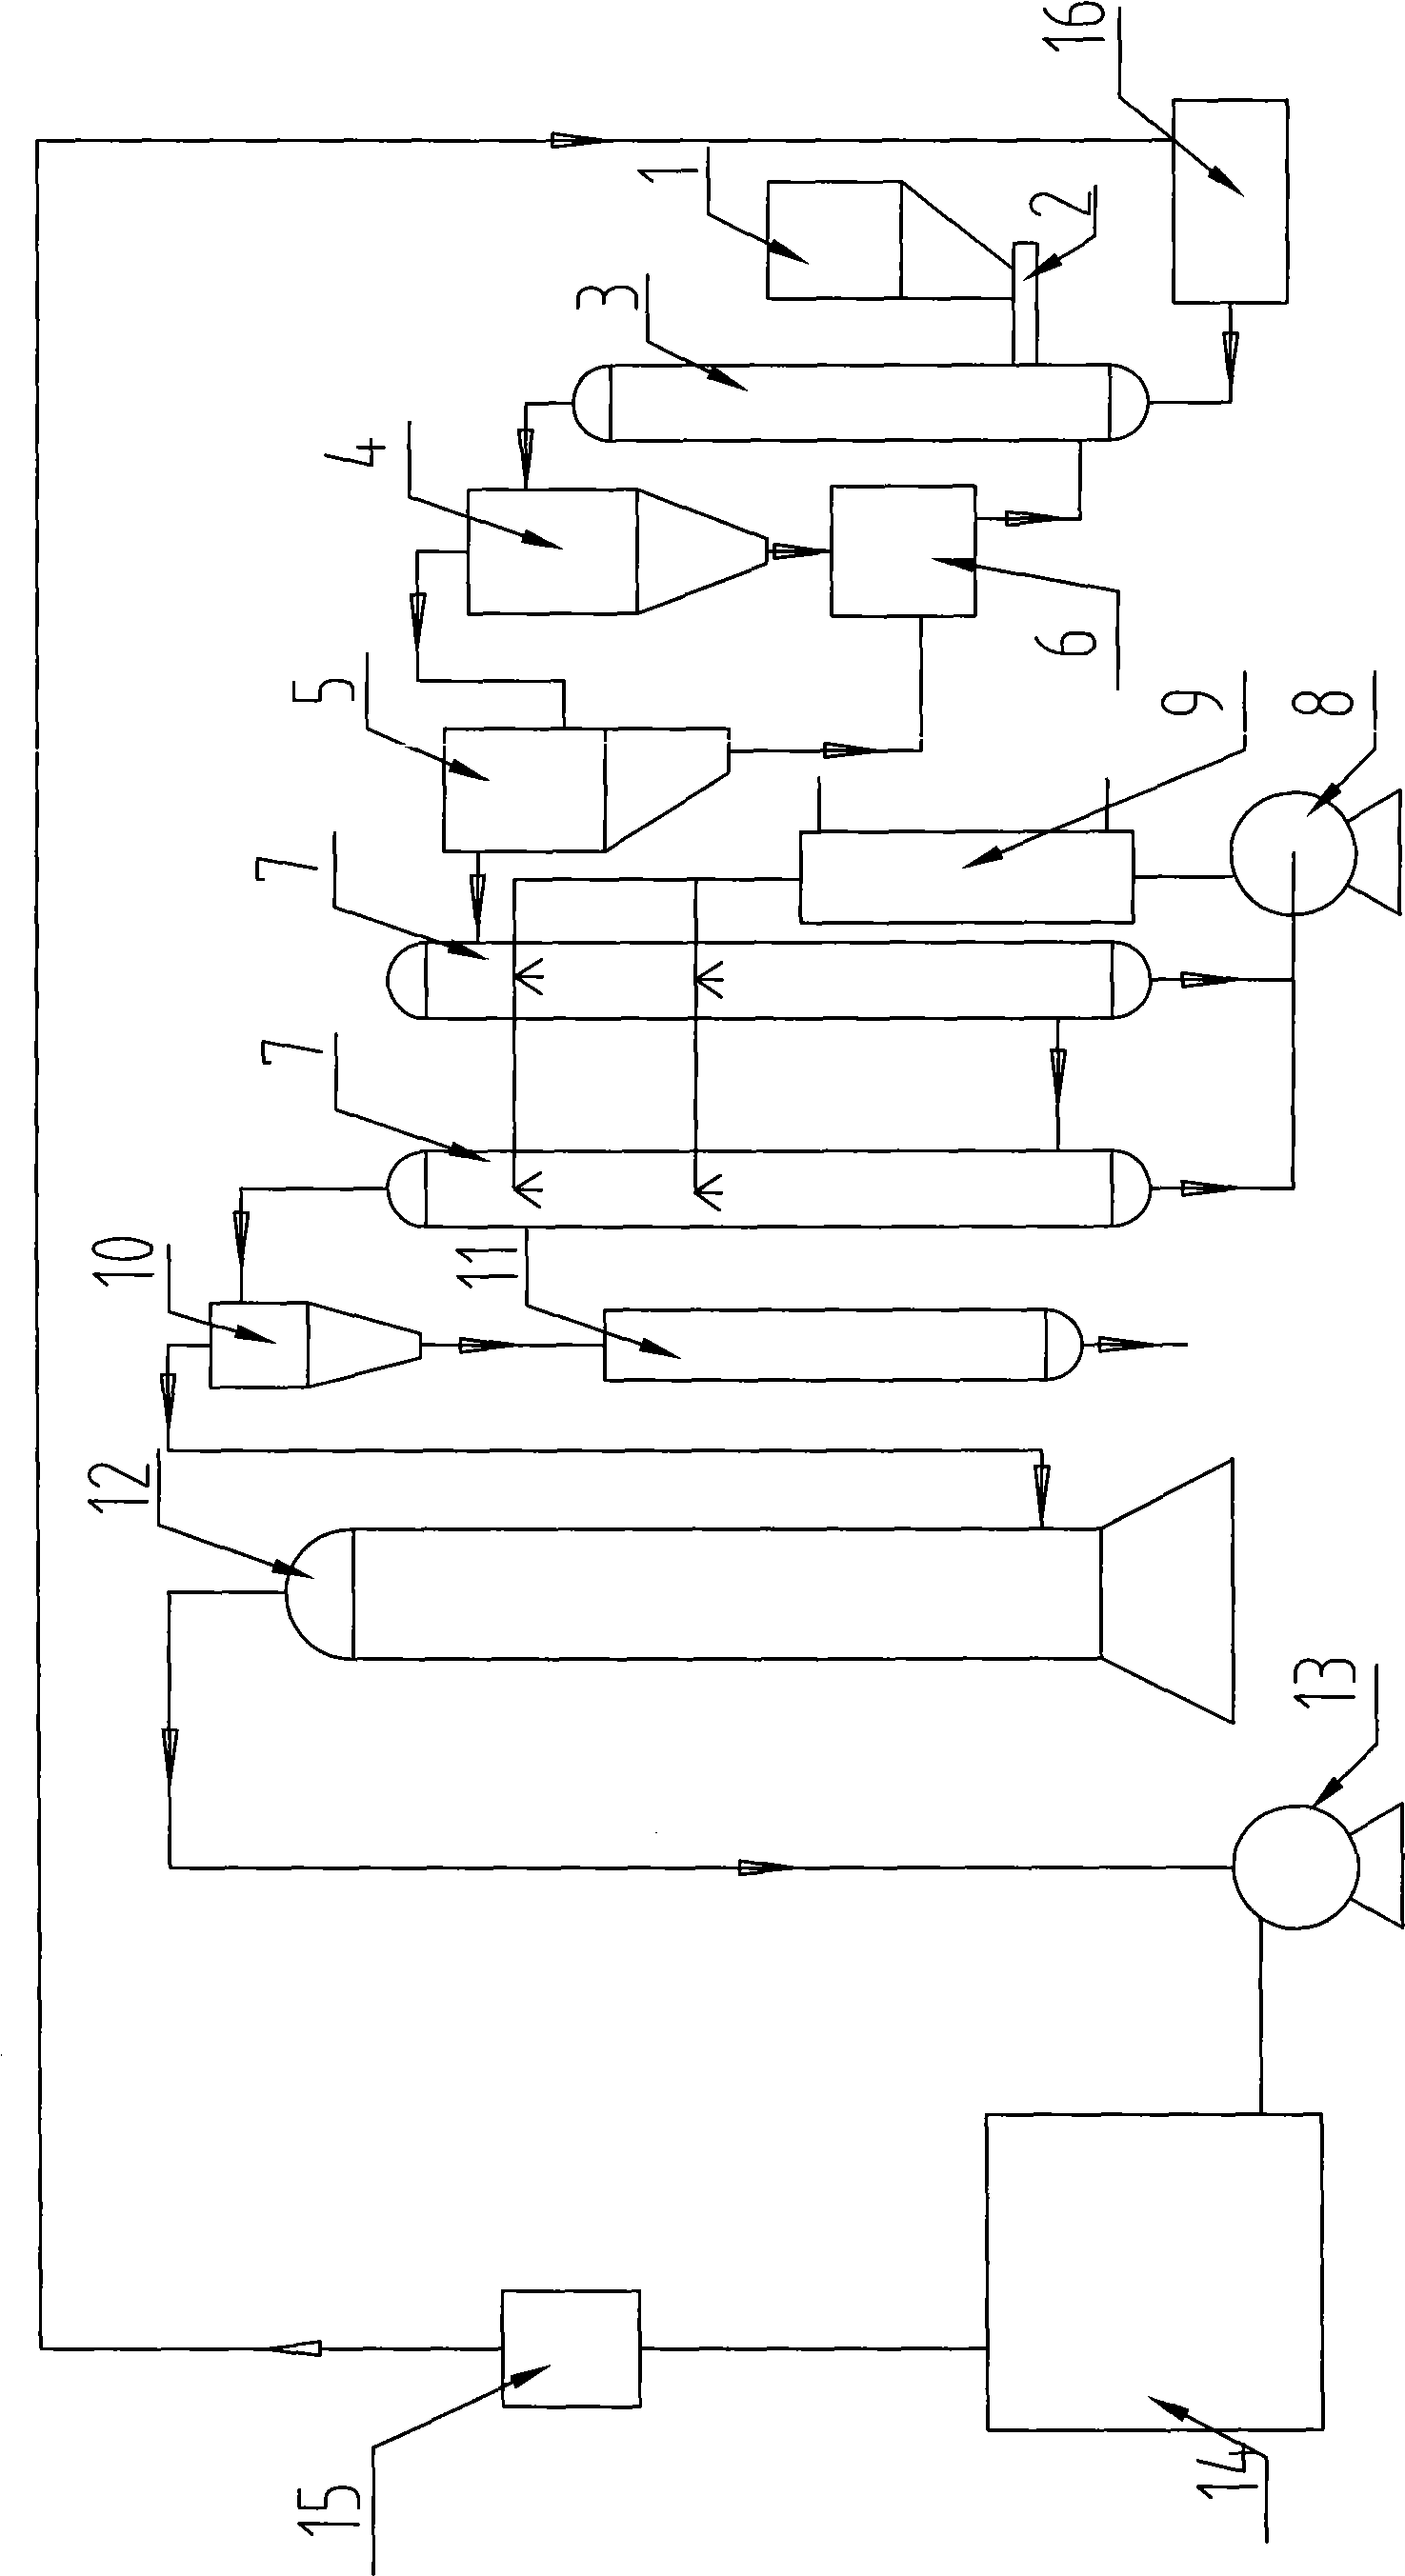 System for rapidly pyrolysing and liquefying biomass